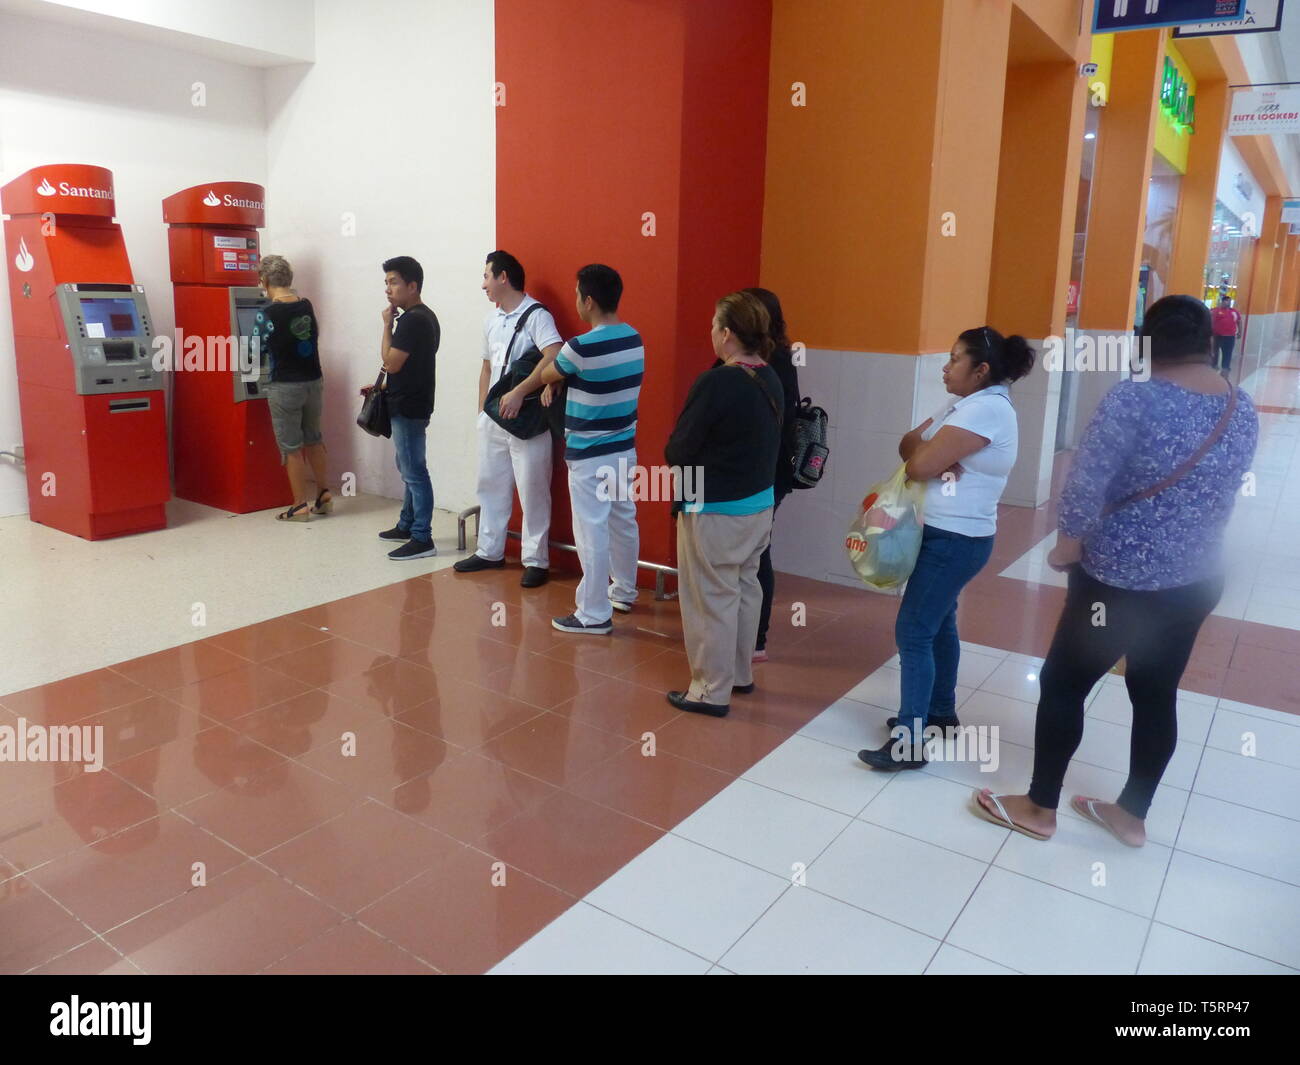 Customers line up to withdraw cash from ATM machine Stock Photo - Alamy